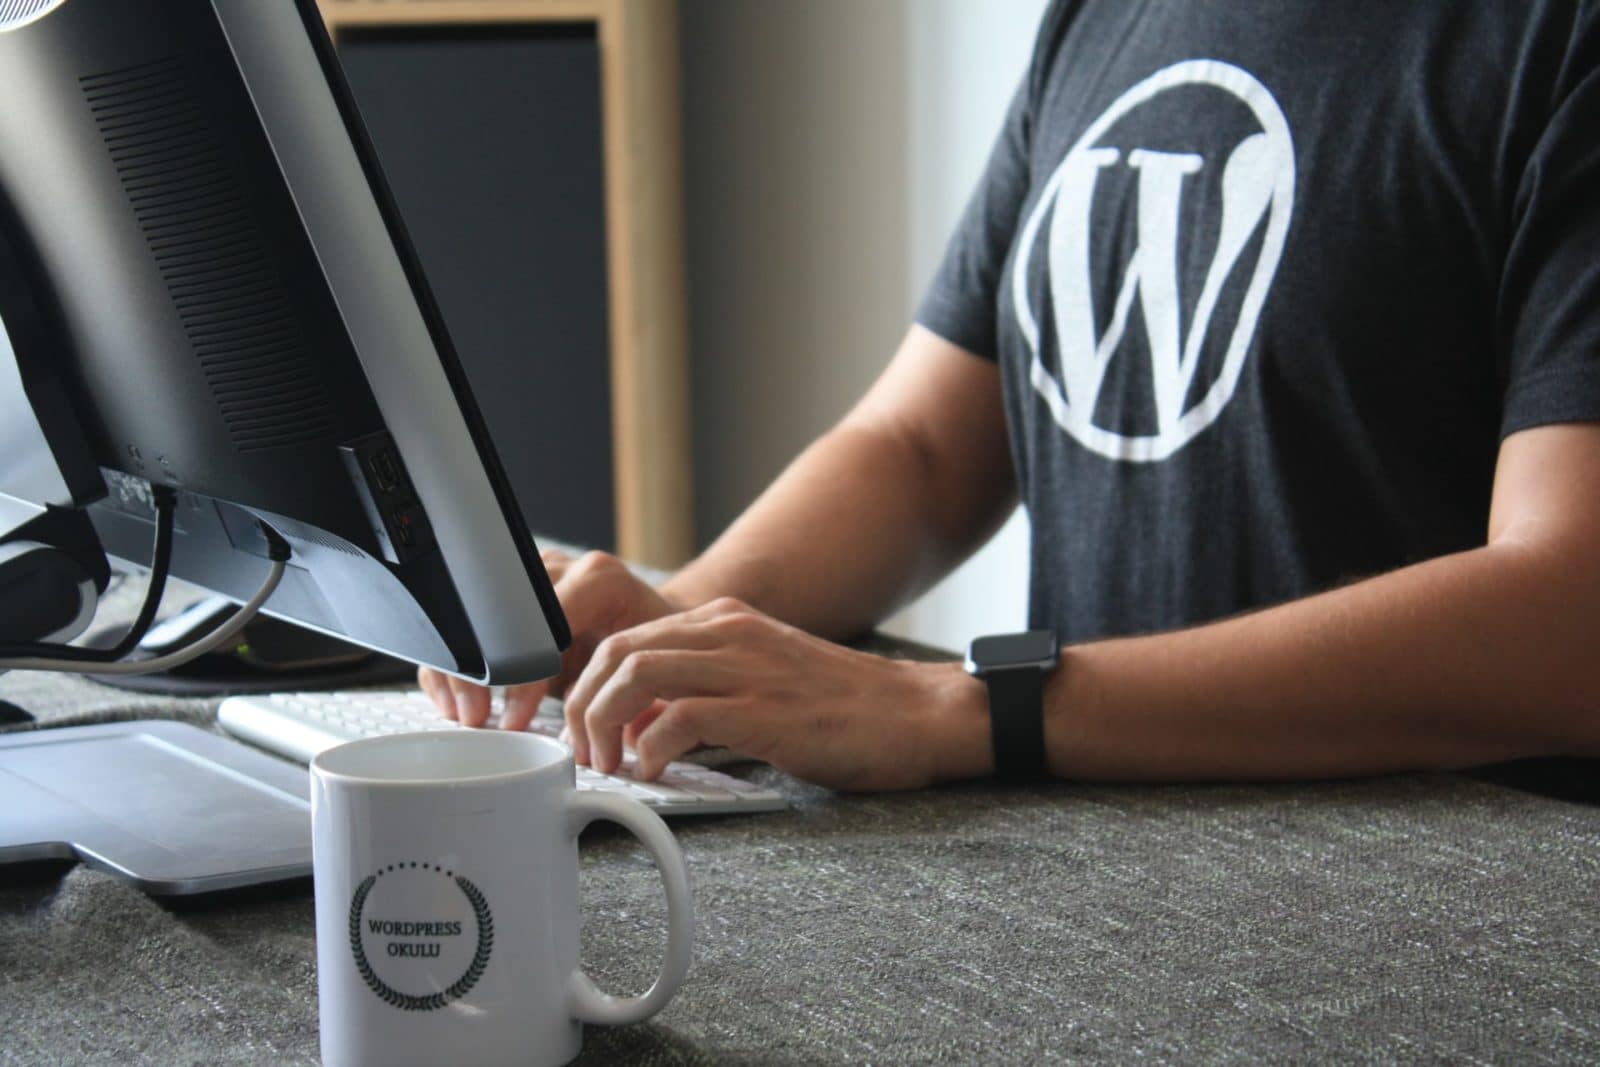 Person typing on a computer wearing a black shirt with the WordPress logo